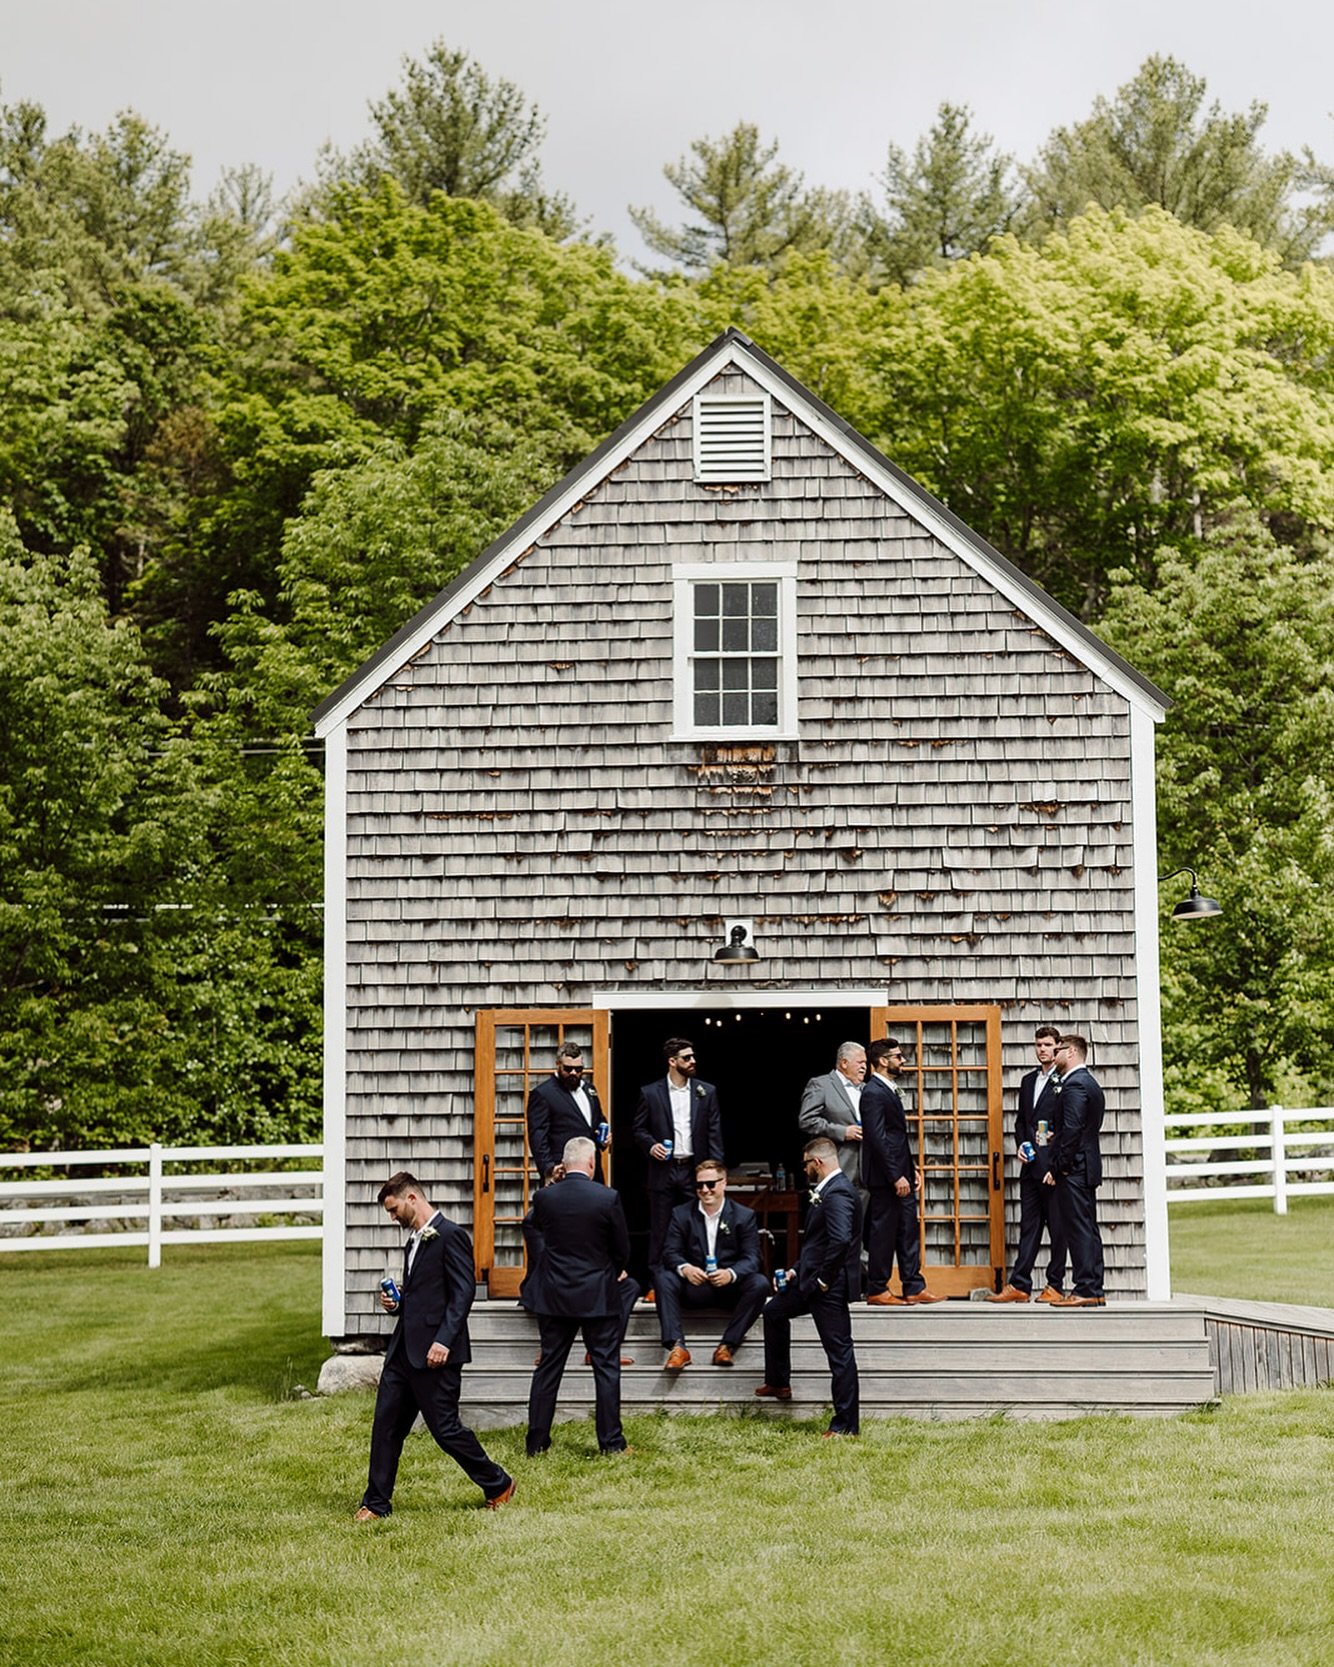 us: . . . where are you getting ready?
most weddings: (shrugs)
grooms at @cunninghamfarmmaine: &ldquo;the carriage barn&rdquo; 🤩
.
.
.
credits:
venue: @cunninghamfarmmaine
photo: @markwspooner // @msp_phototeam
caterer and bar: @fireandco
DJ: @servi